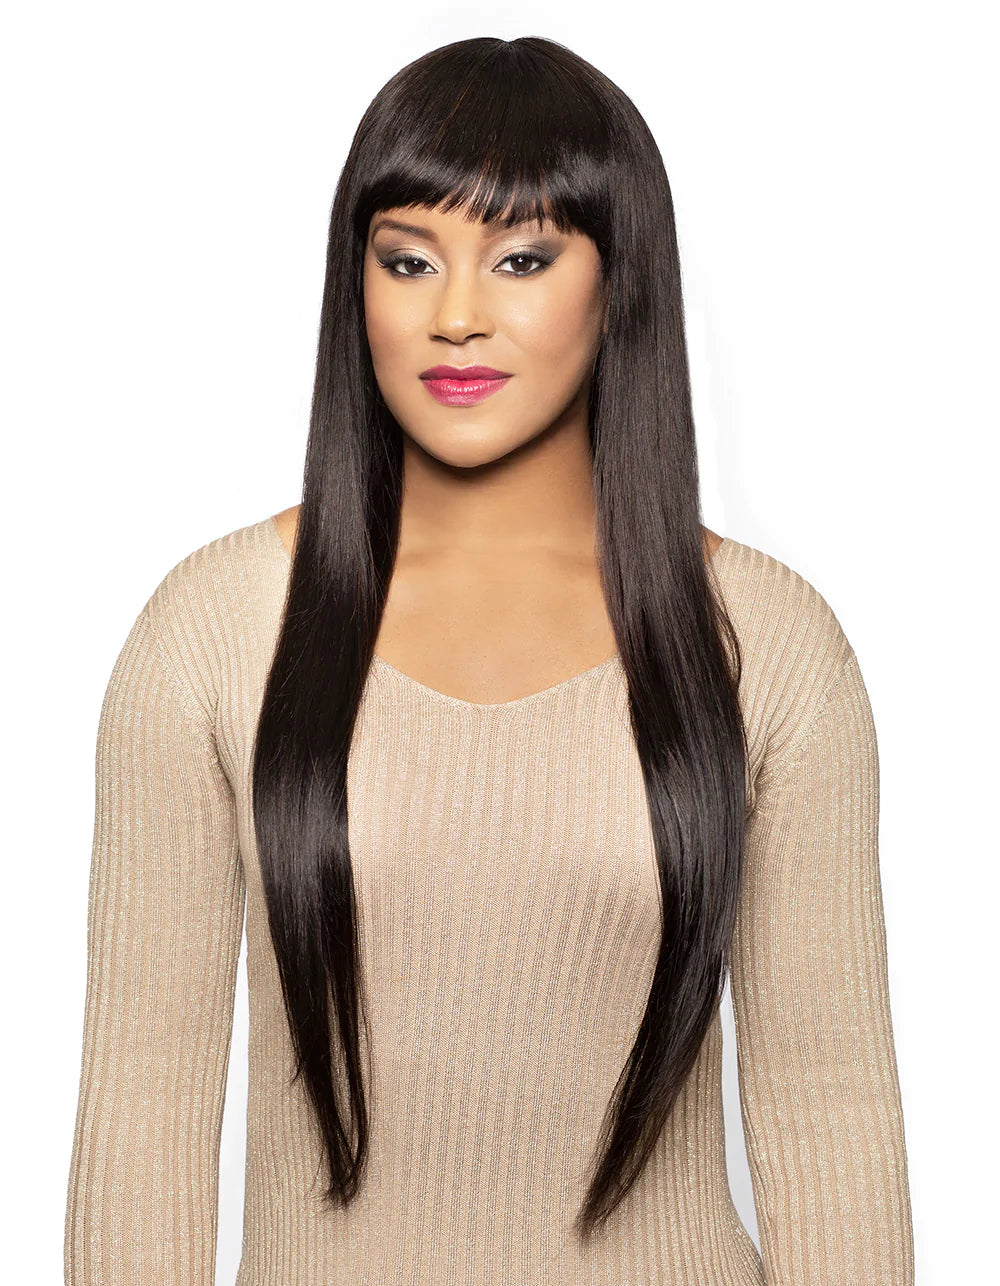 Alicia FOXY LADY H/H GISELLE WIG 30